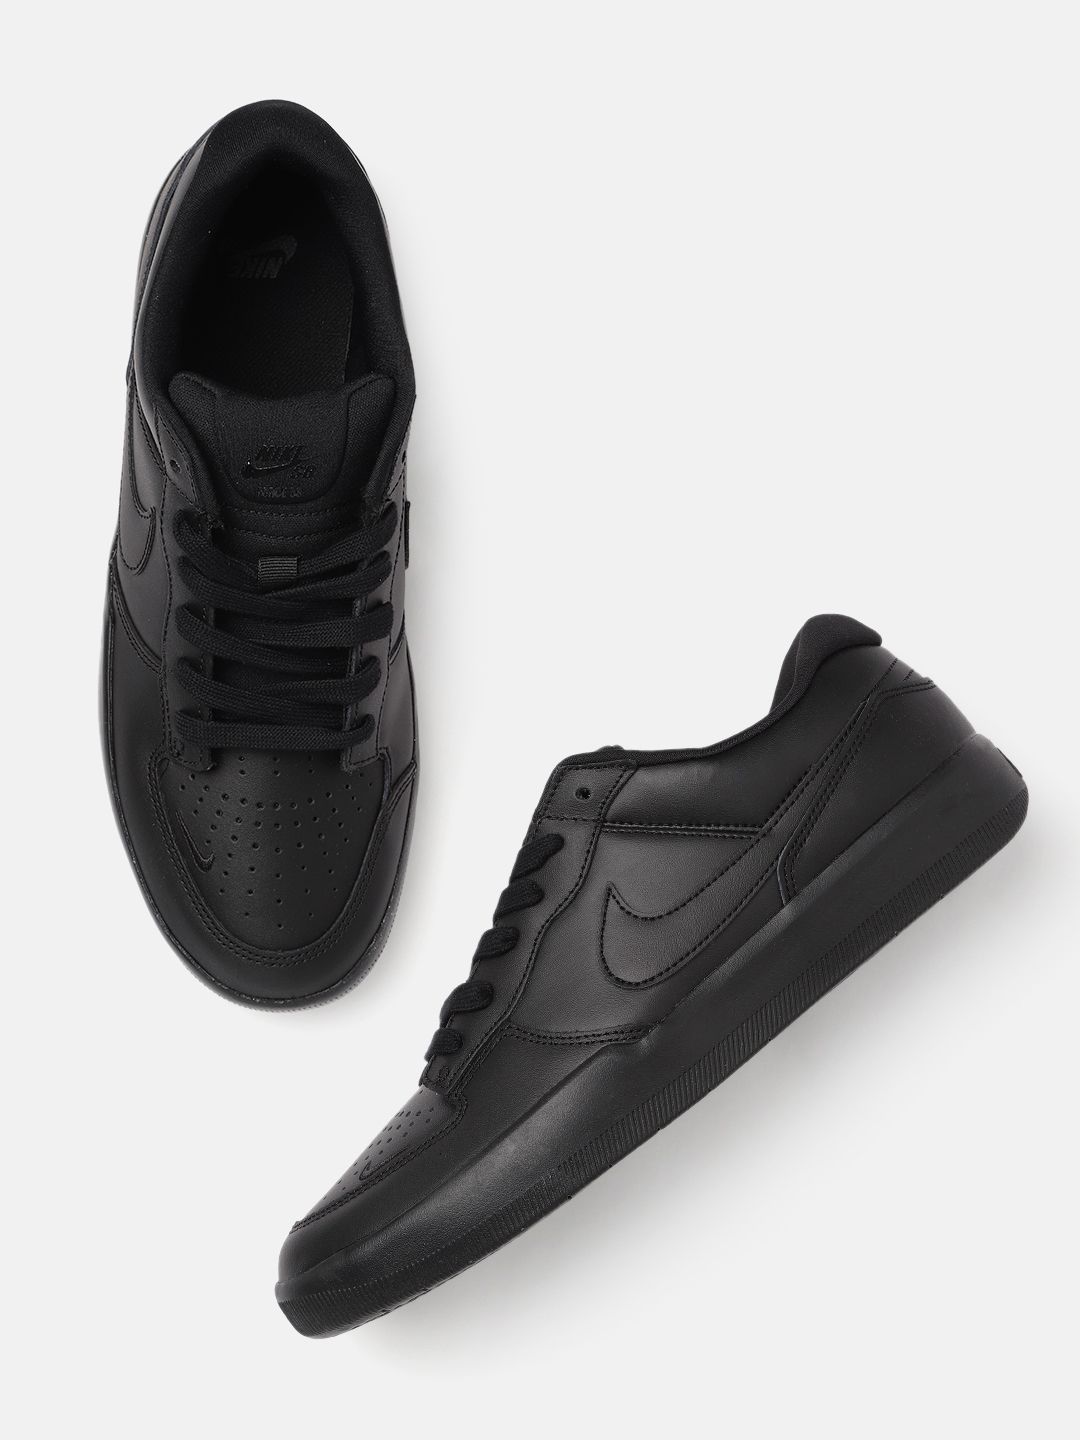 Nike Unisex Black Force 58 Leather Skateboarding Shoes Price in India